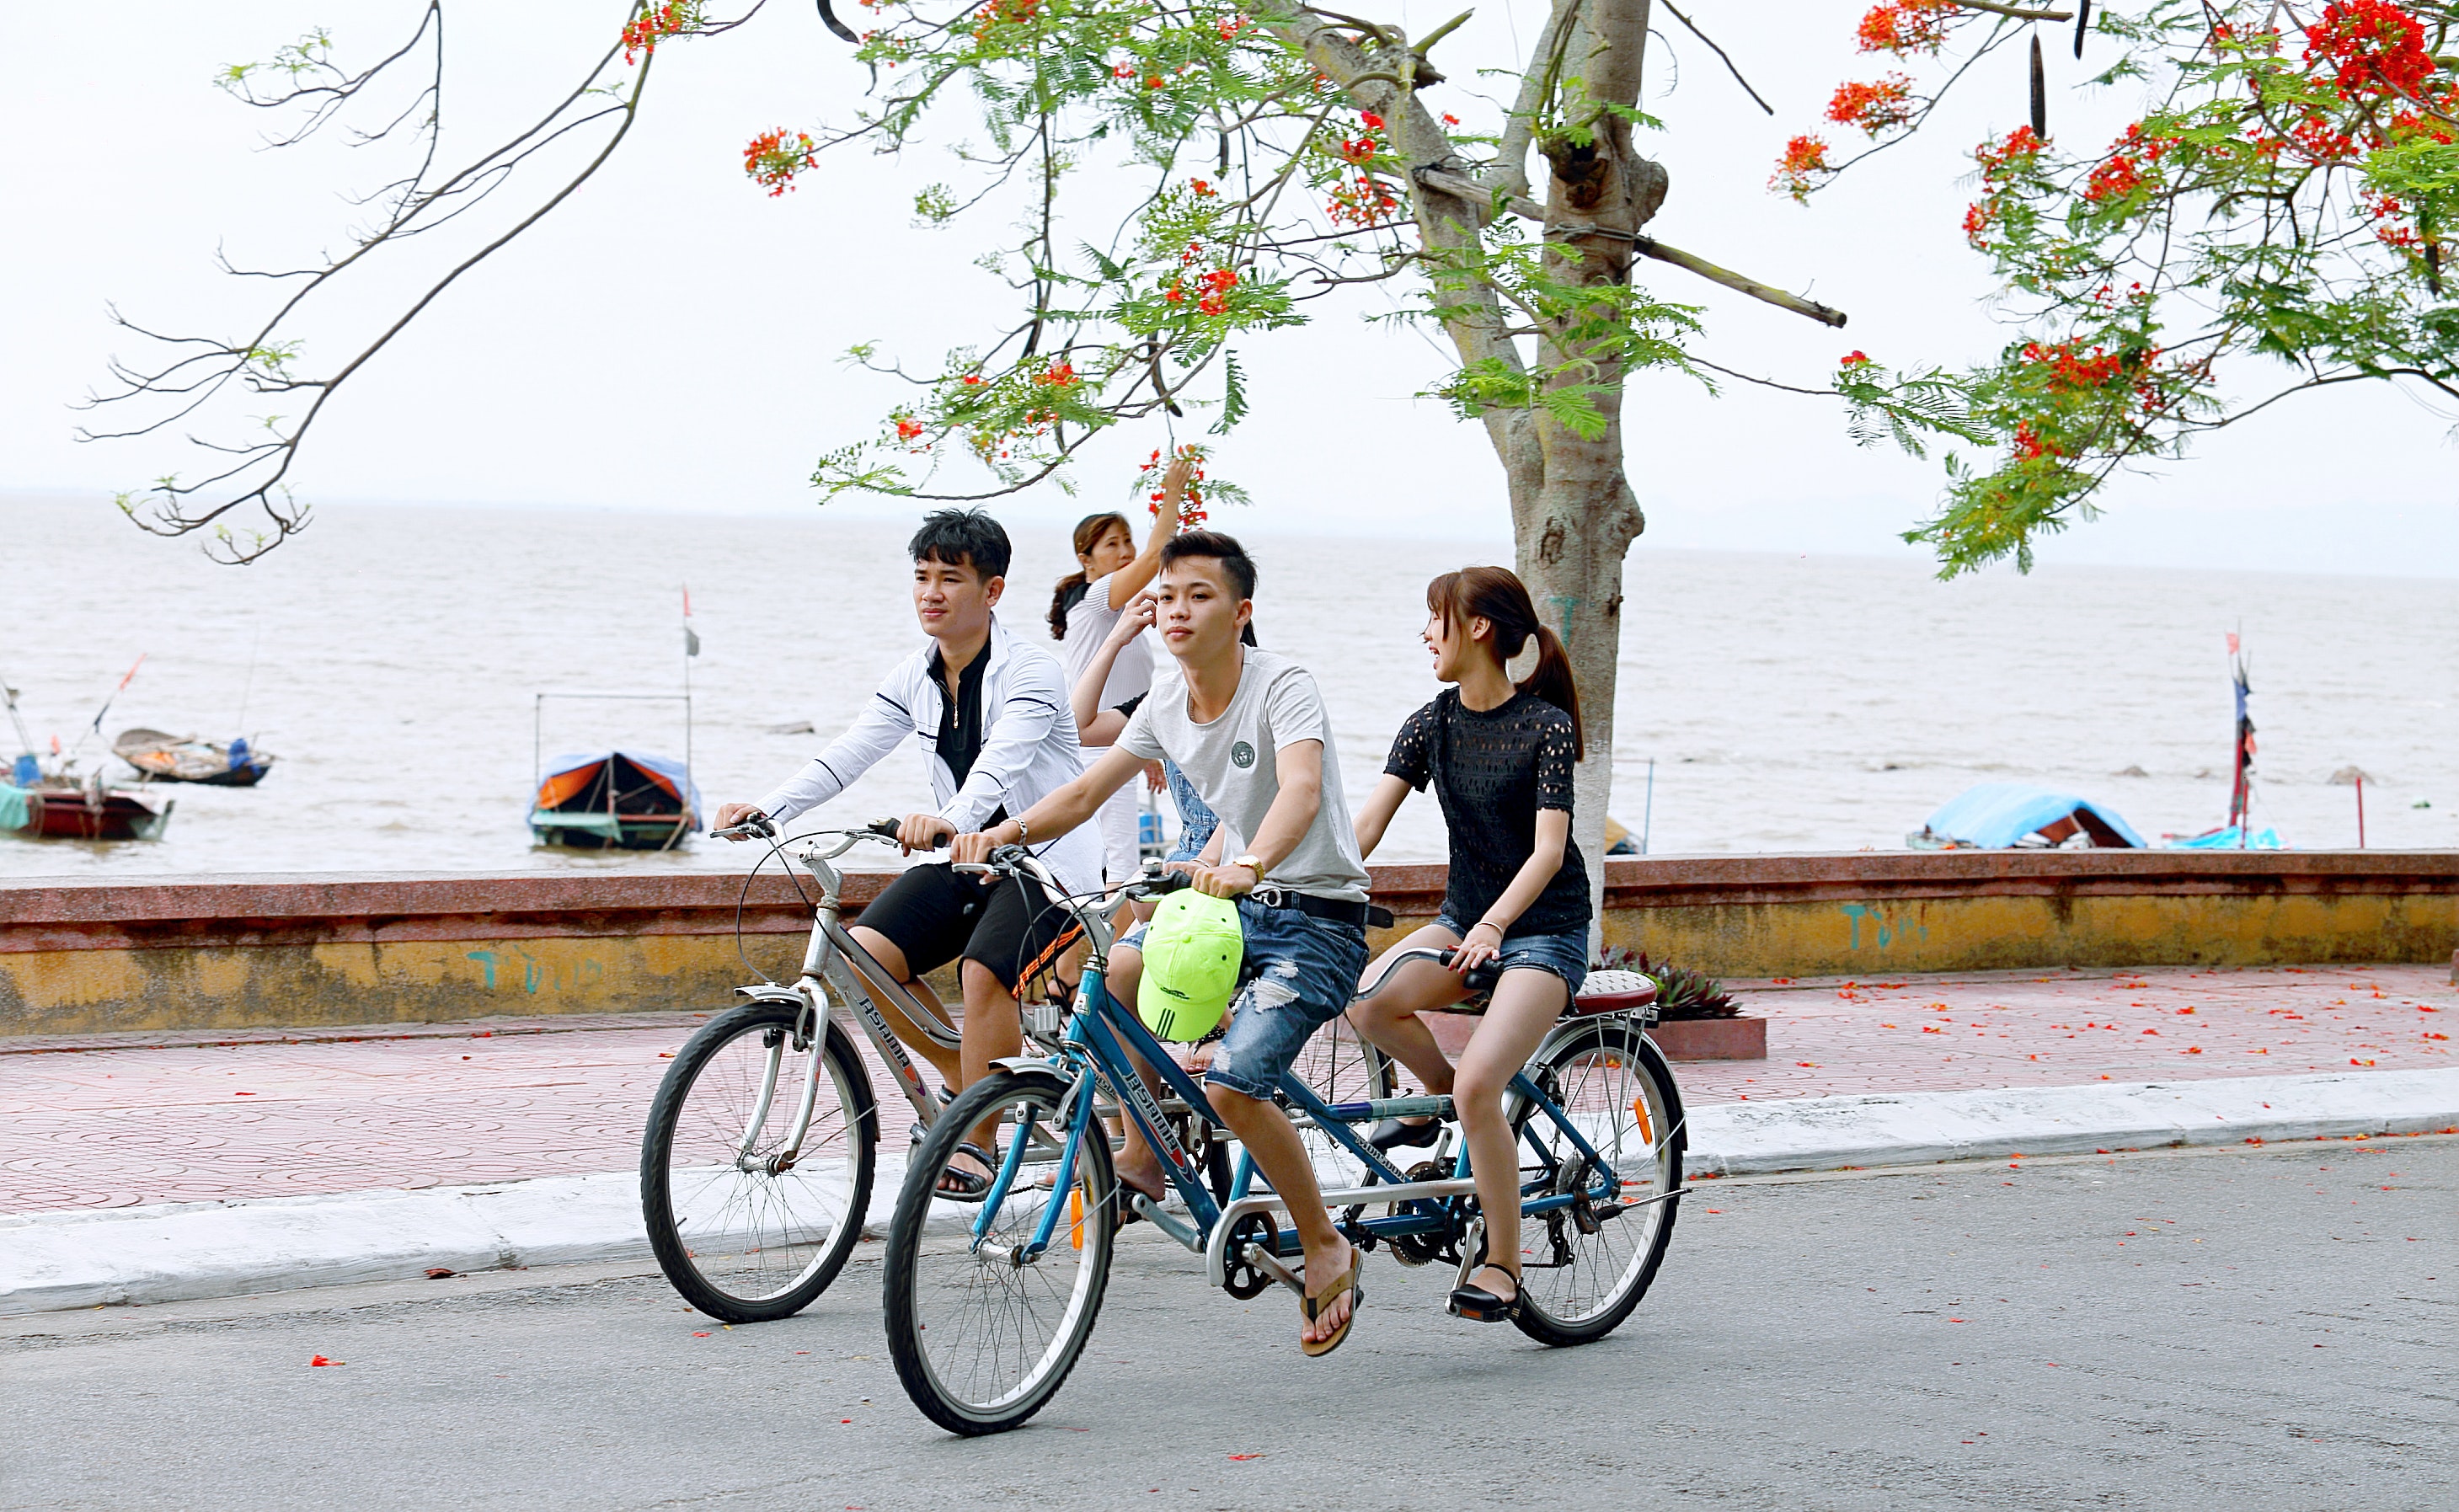 Two Boys and One Girl Riding Bicycles on Road Beside Body of Water, Action, Road, Wear, Watercrafts, HQ Photo